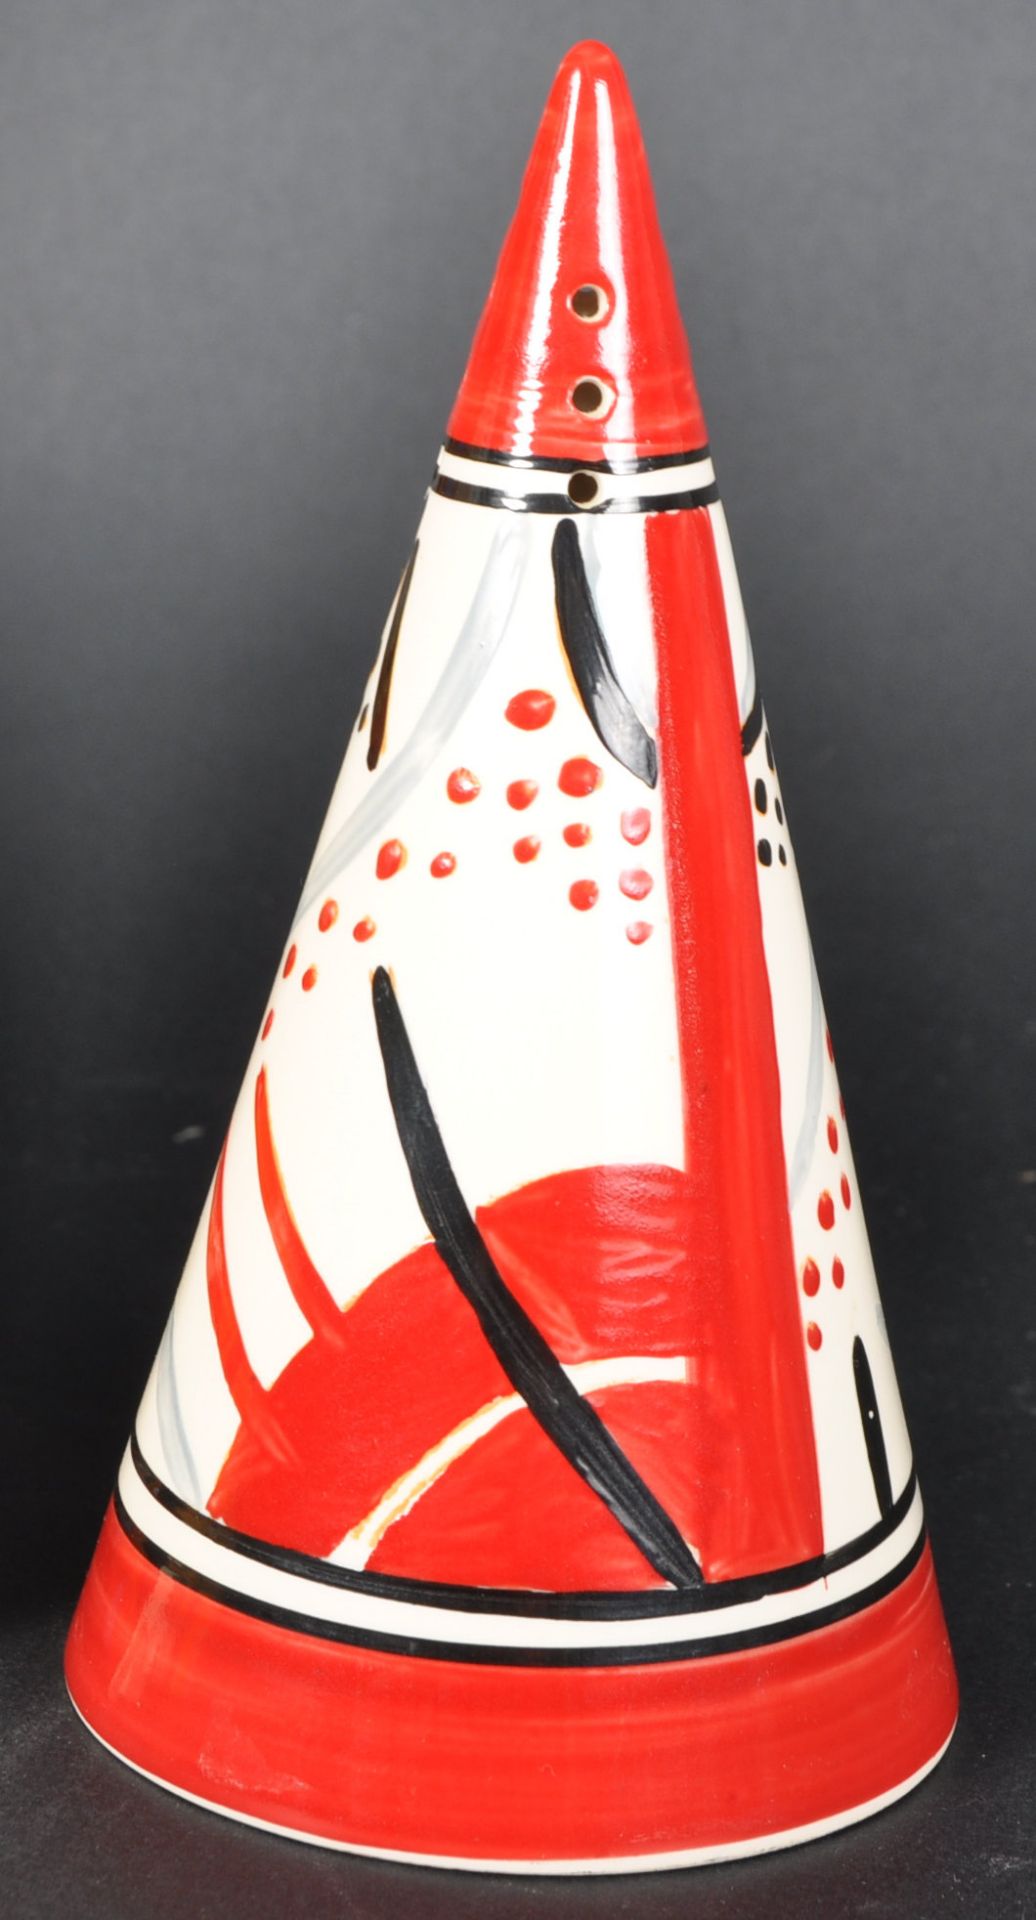 CLARICE CLIFF CARPET CONICAL SUGAR SIFTER - Image 2 of 6